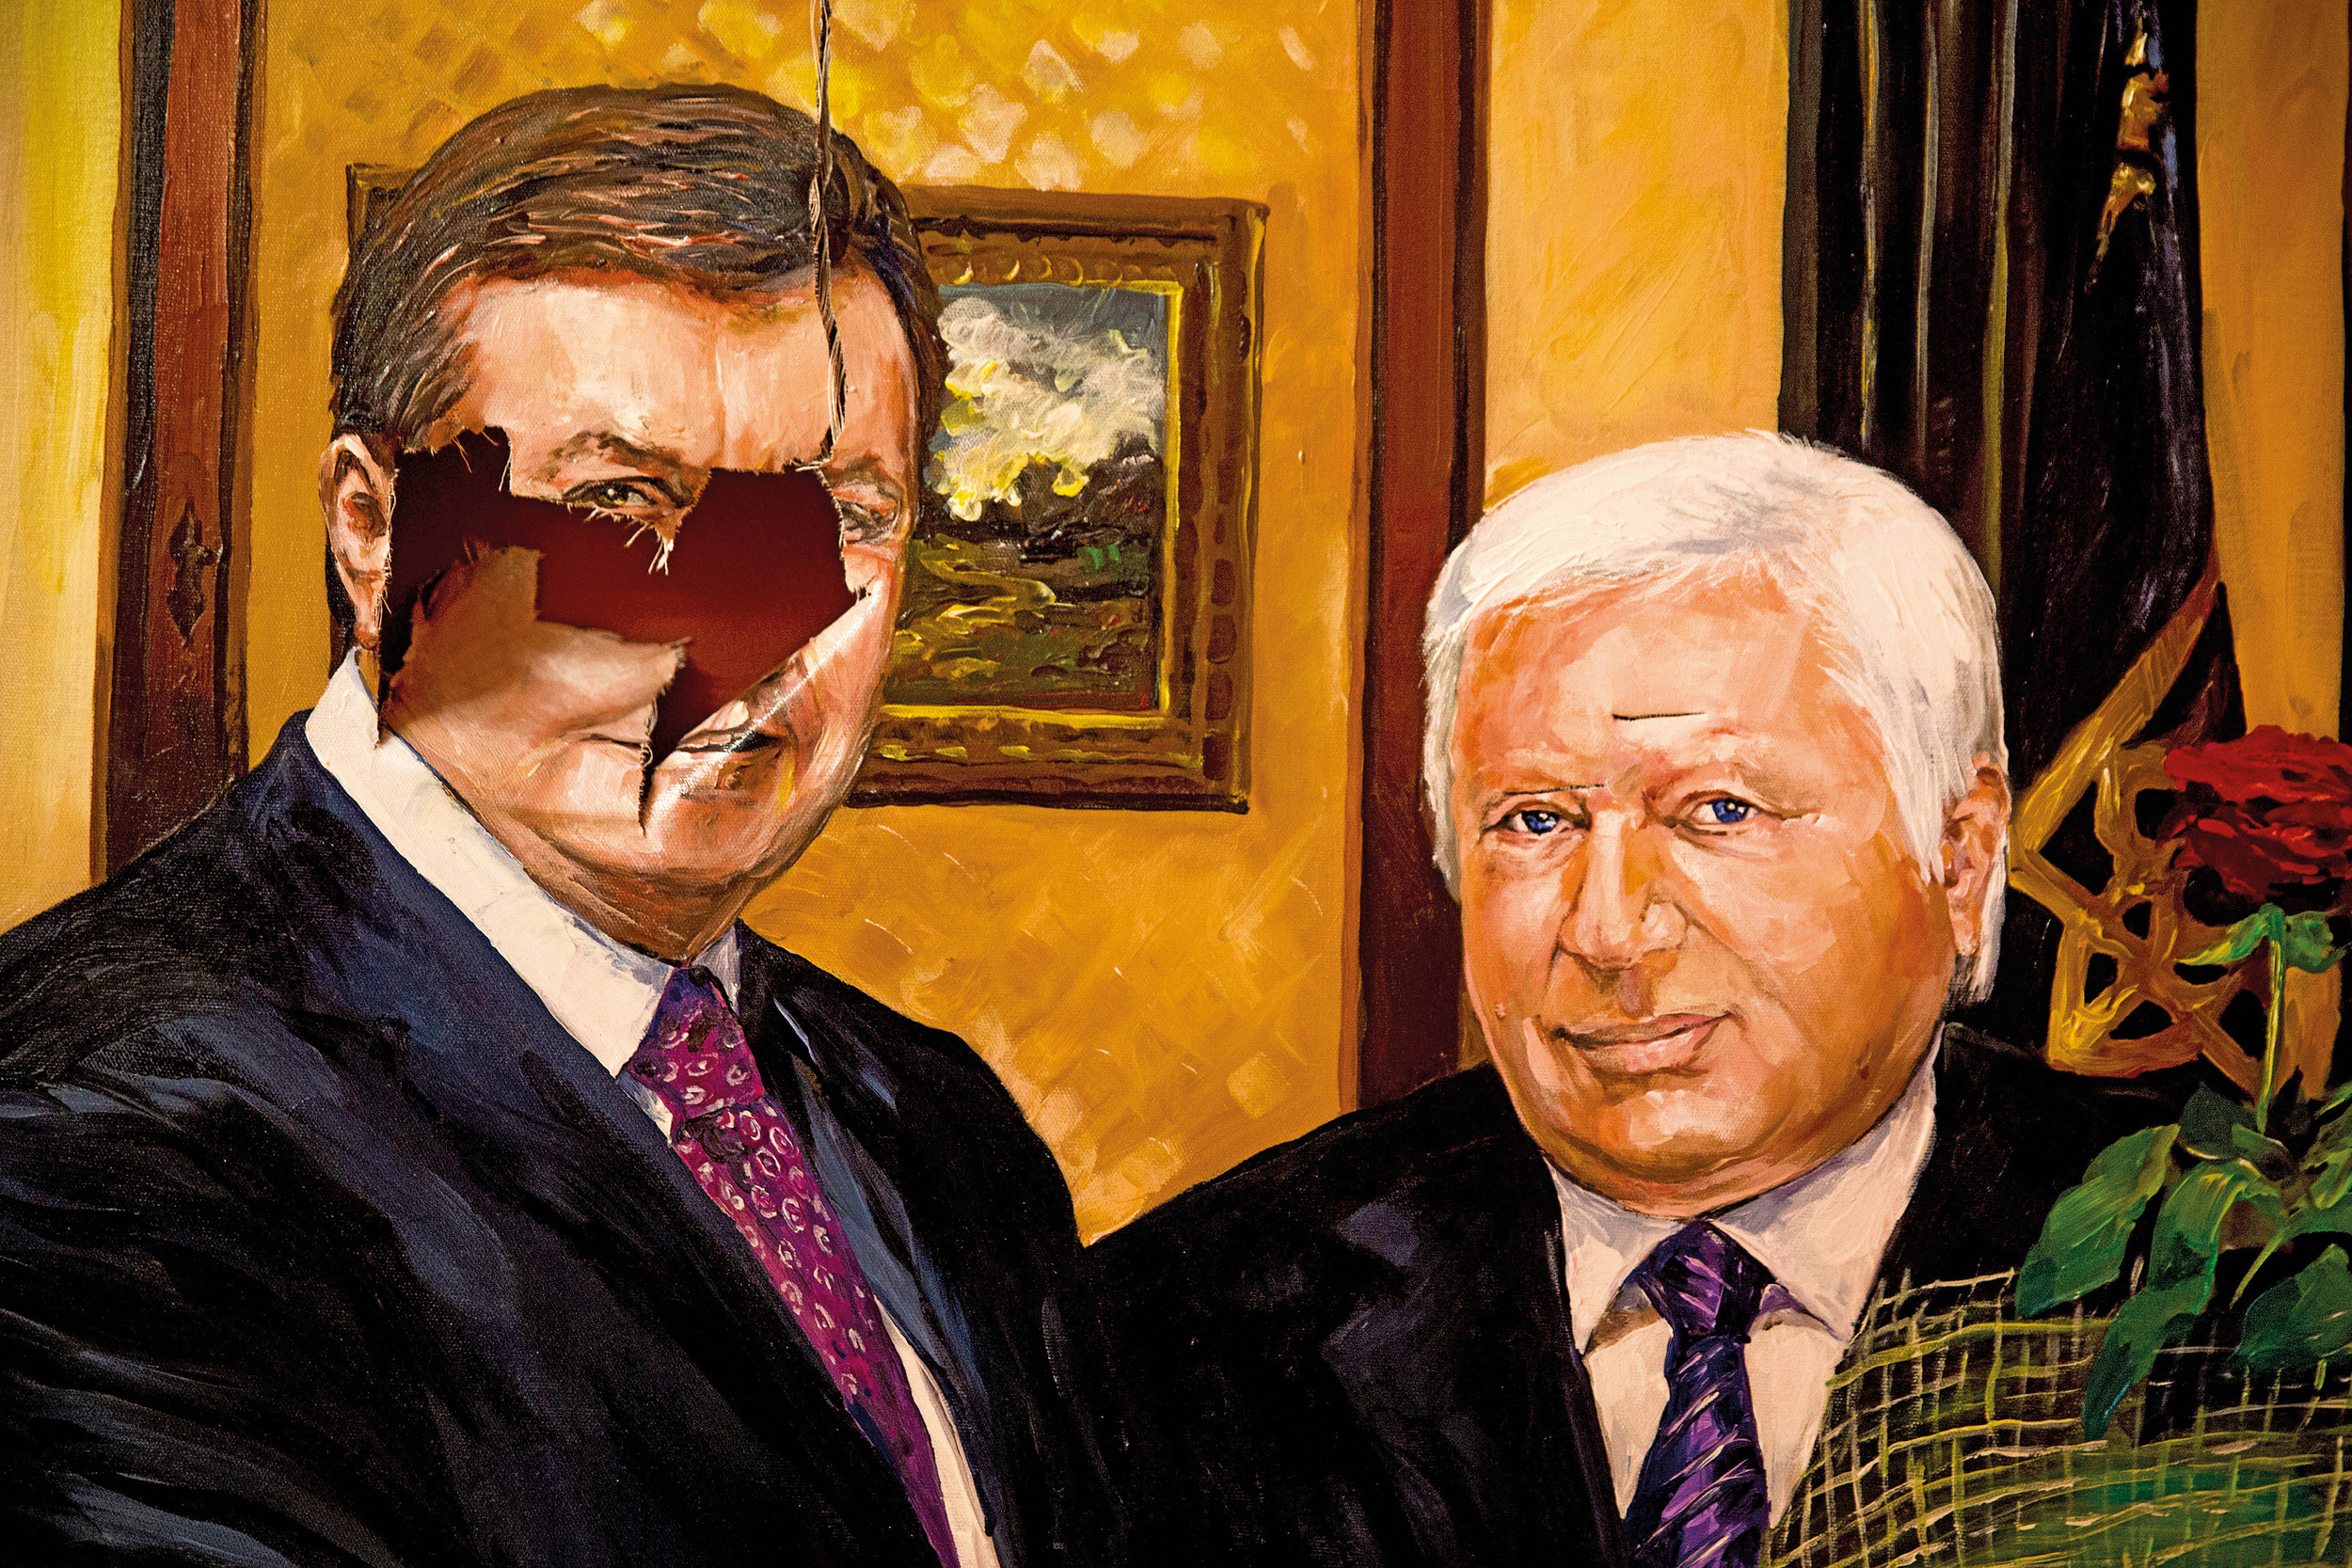  Portrait of Ukrainian ex-president Yanukovich and ex-prosecutor general Pshonka is seen damaged after protesters assaulted Yanukovich's residency when he fled the country. The portrait is a part of an exposition of president's goods that was install